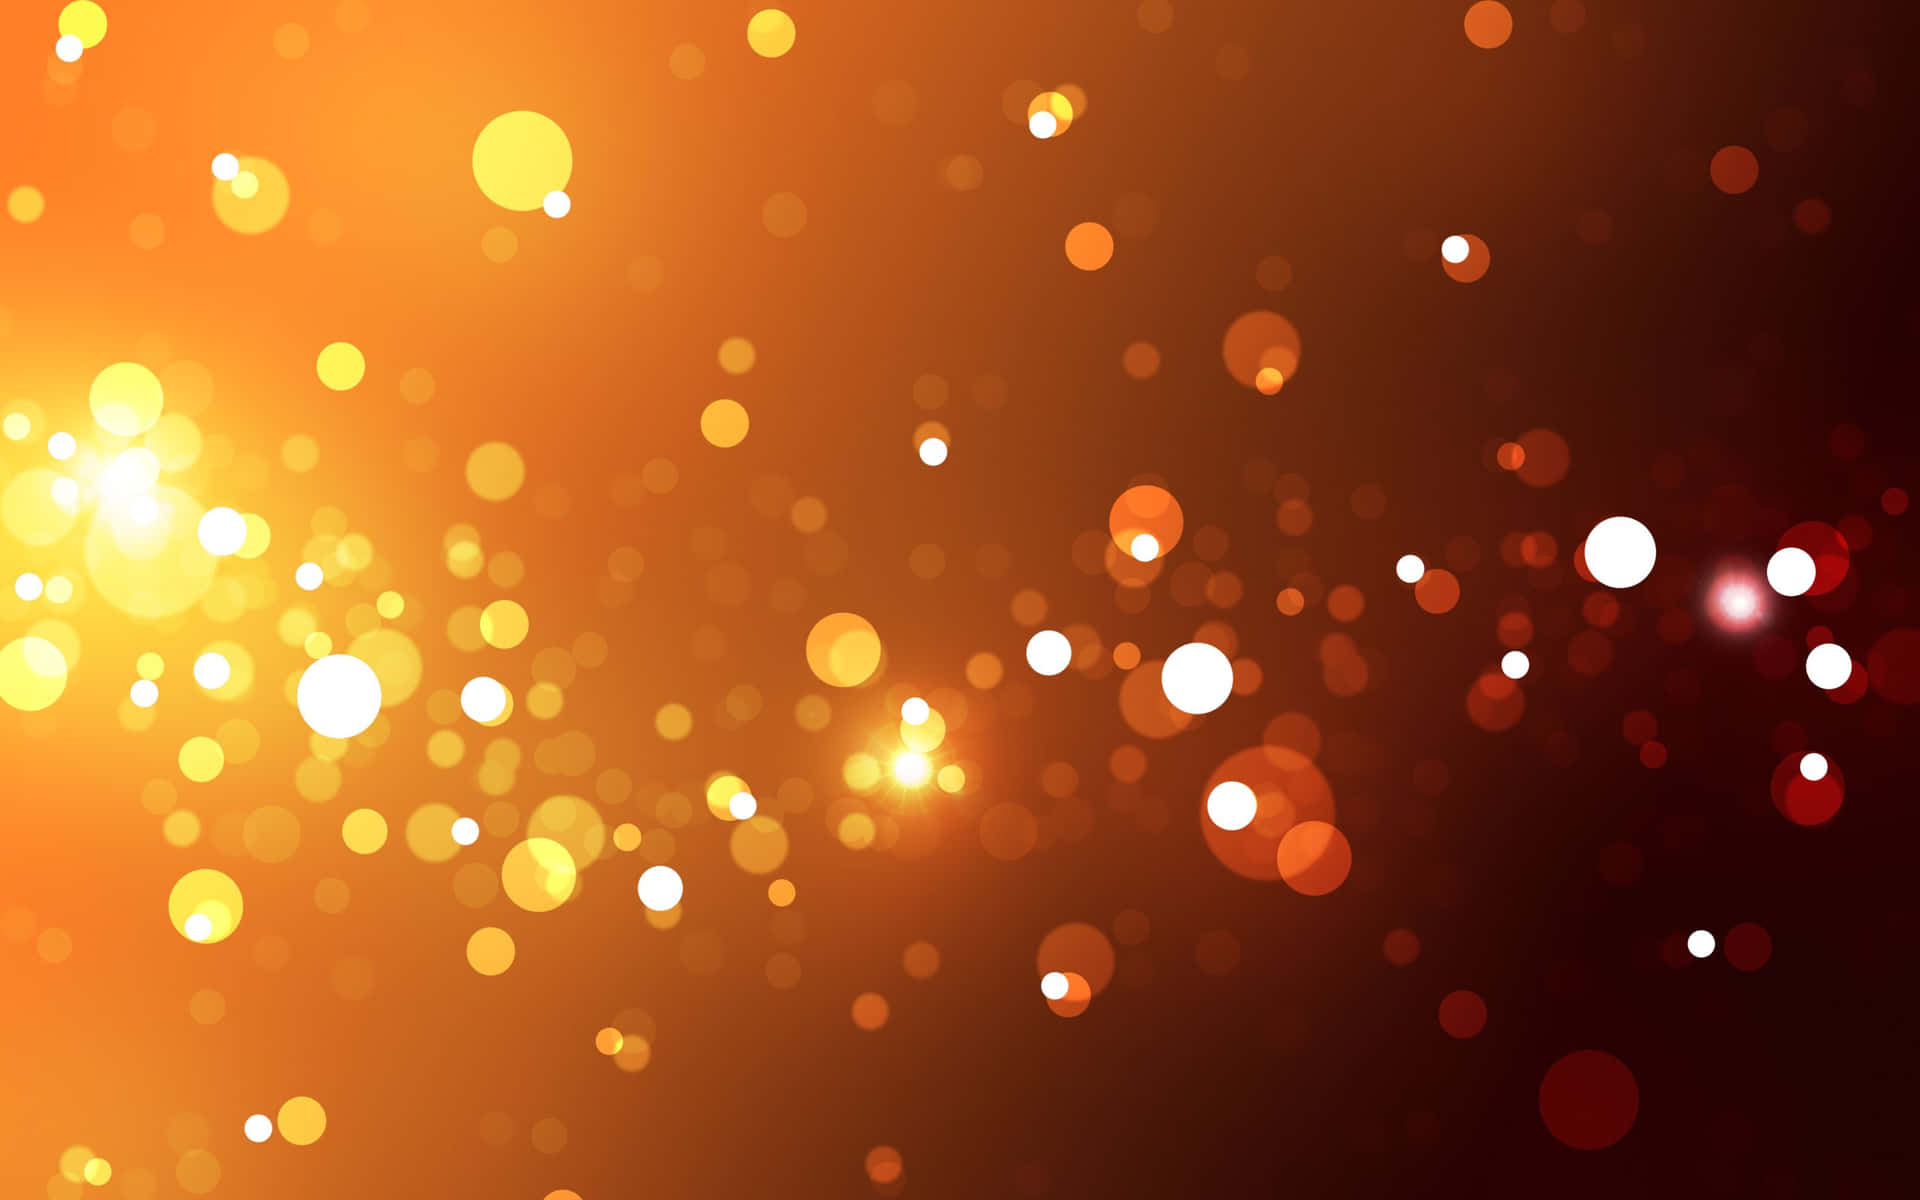 Bokeh Effects In Black And Orange Background